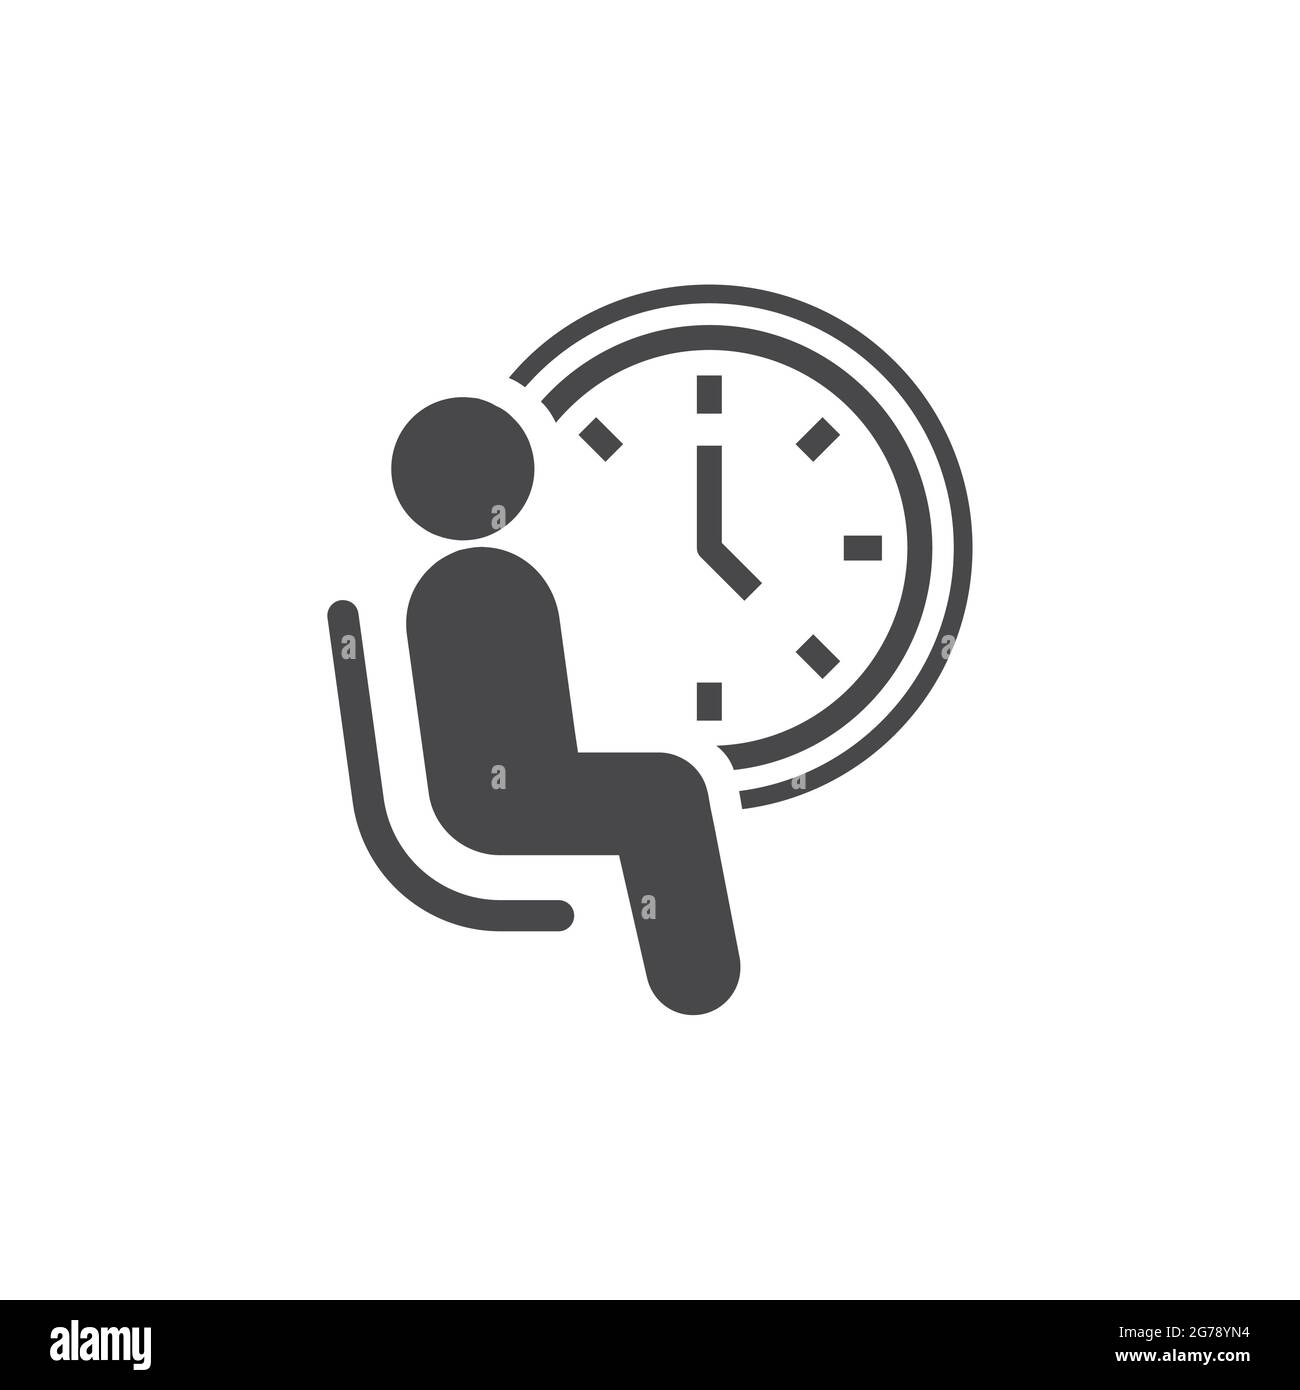 Waiting room black vector icon. Man sitting in a chair with a clock symbol. Stock Vector